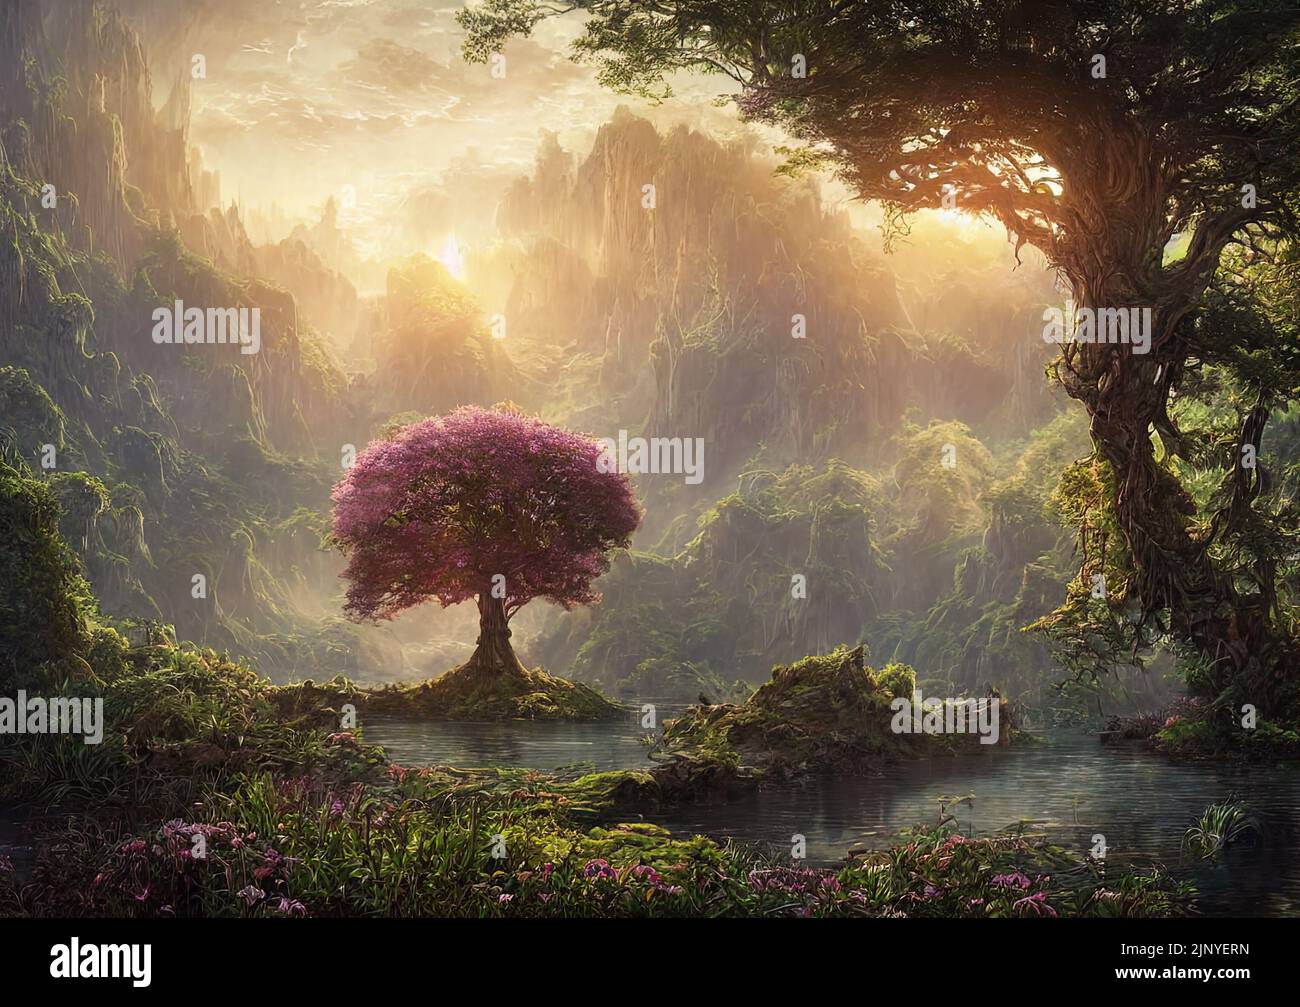 3d rendering of surreal beautiful fantasy land with lake and giant trees Stock Photo